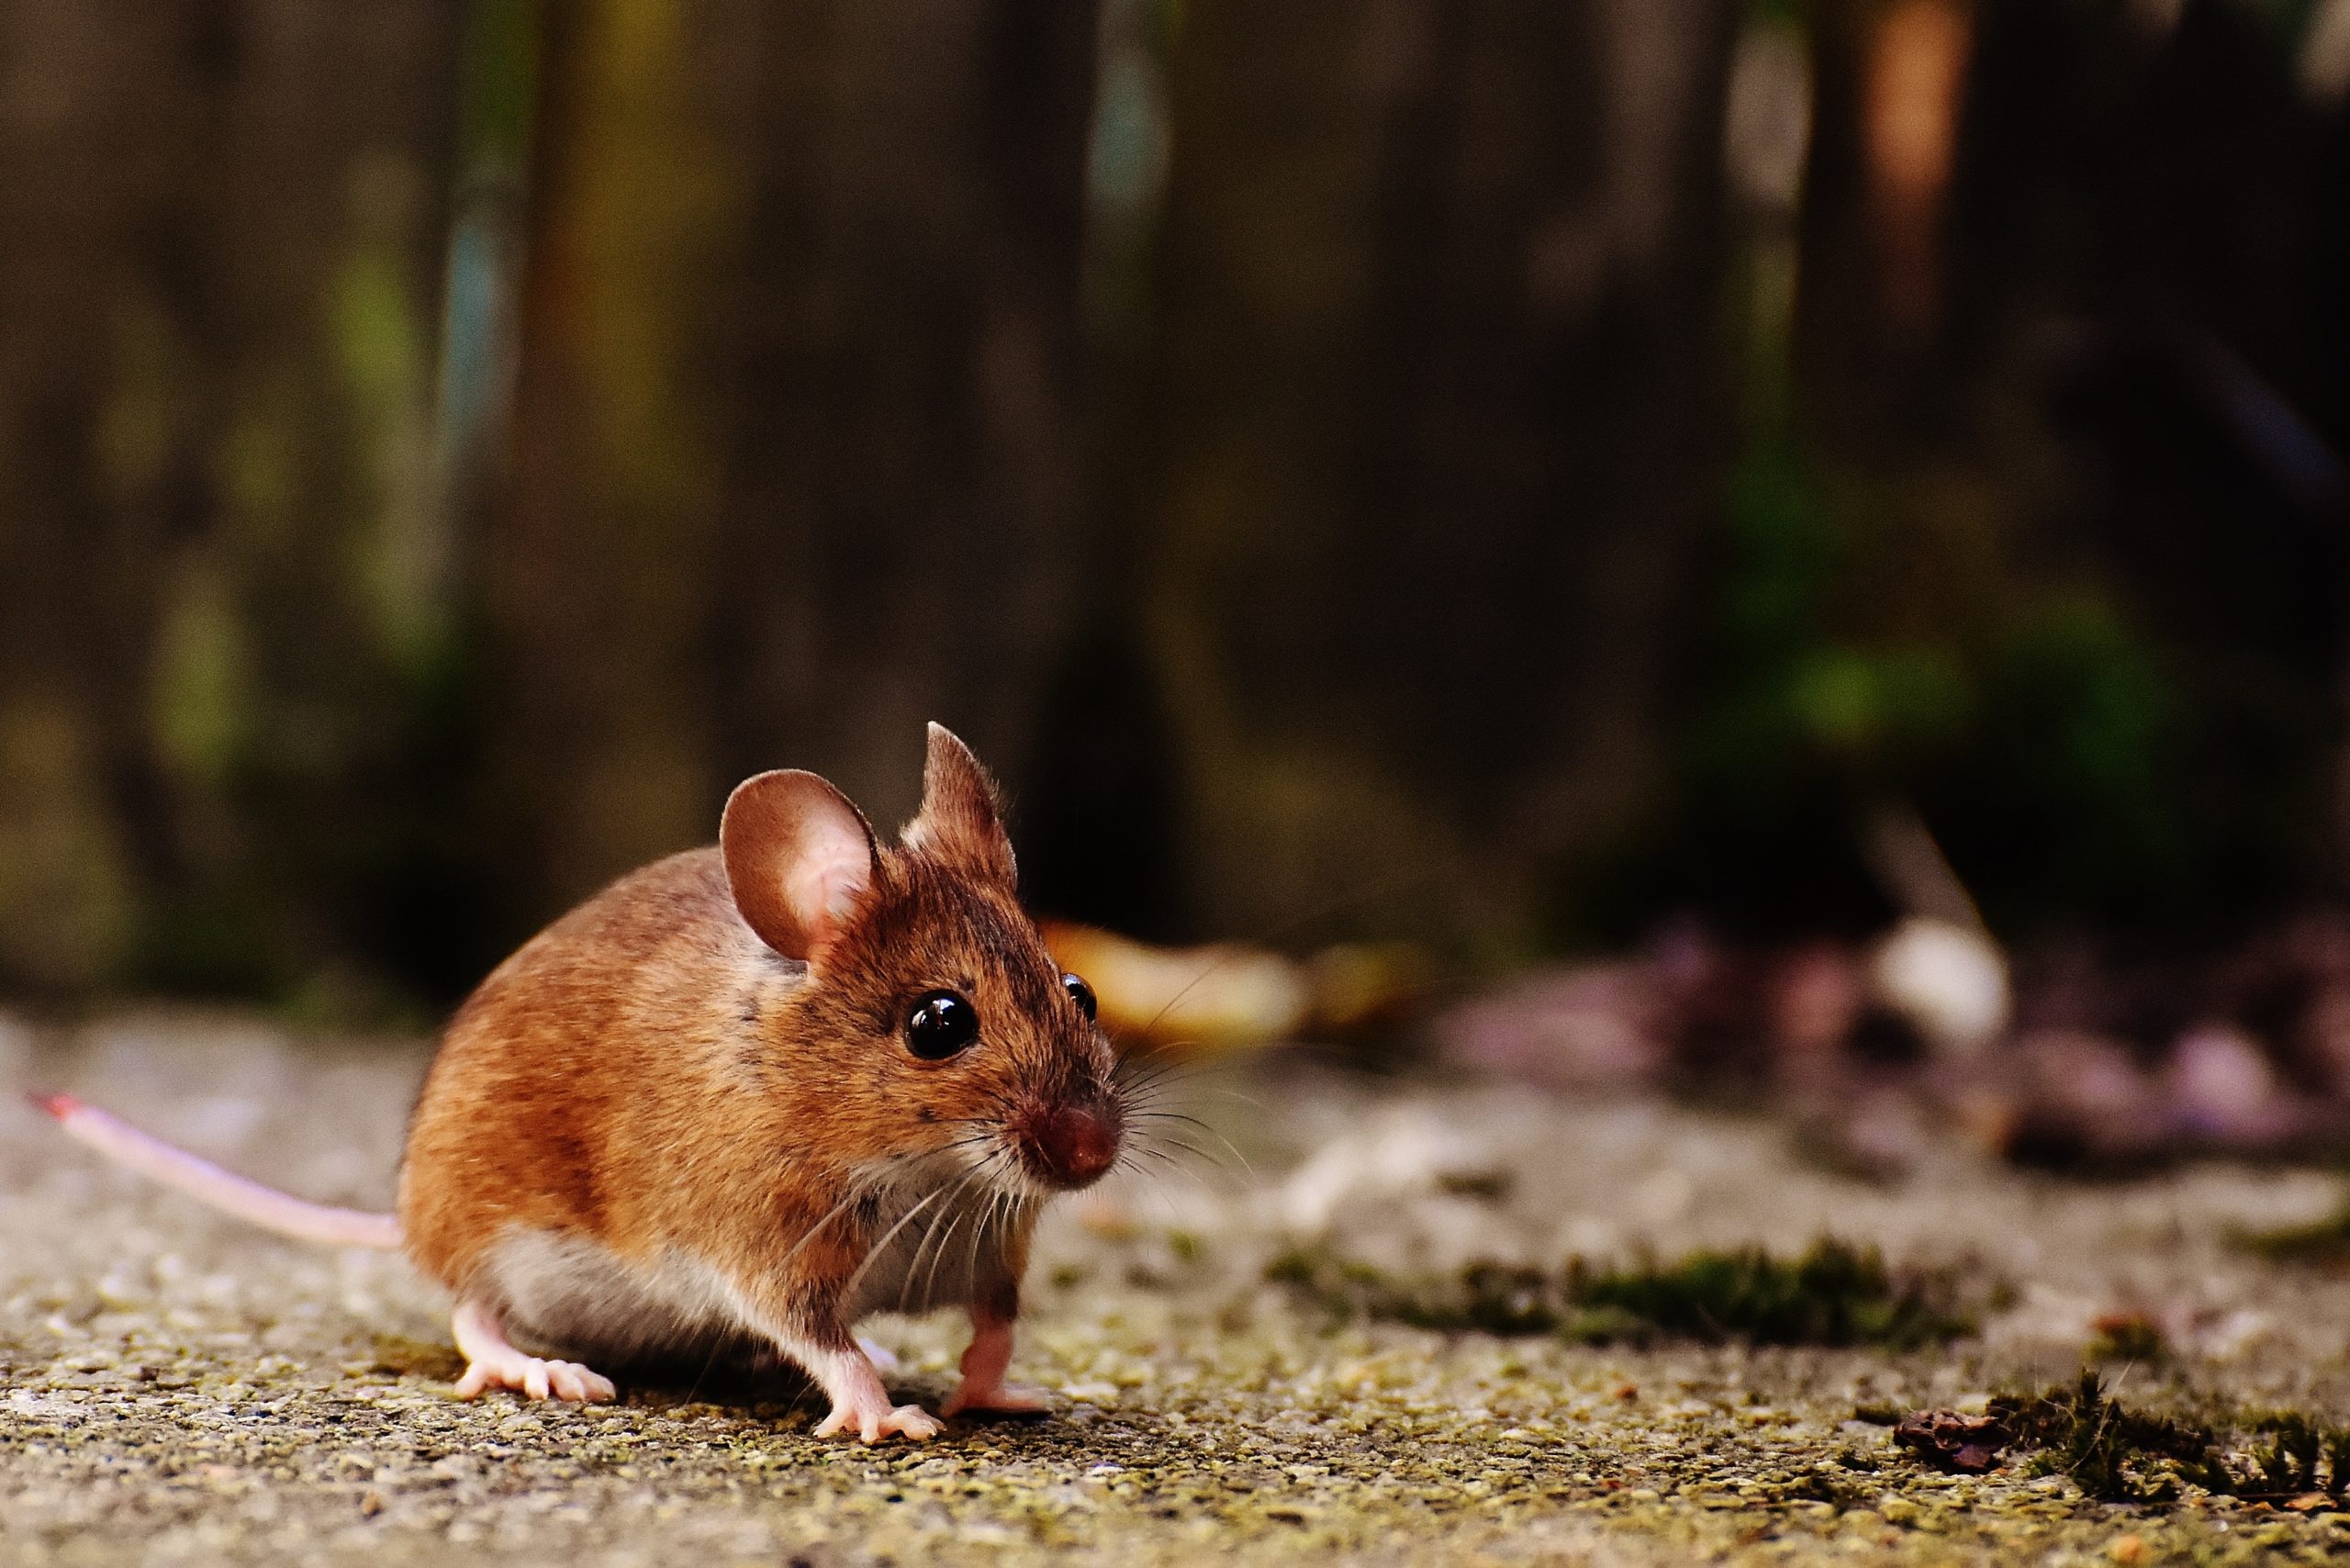 A small mouse crosses the forest floor.